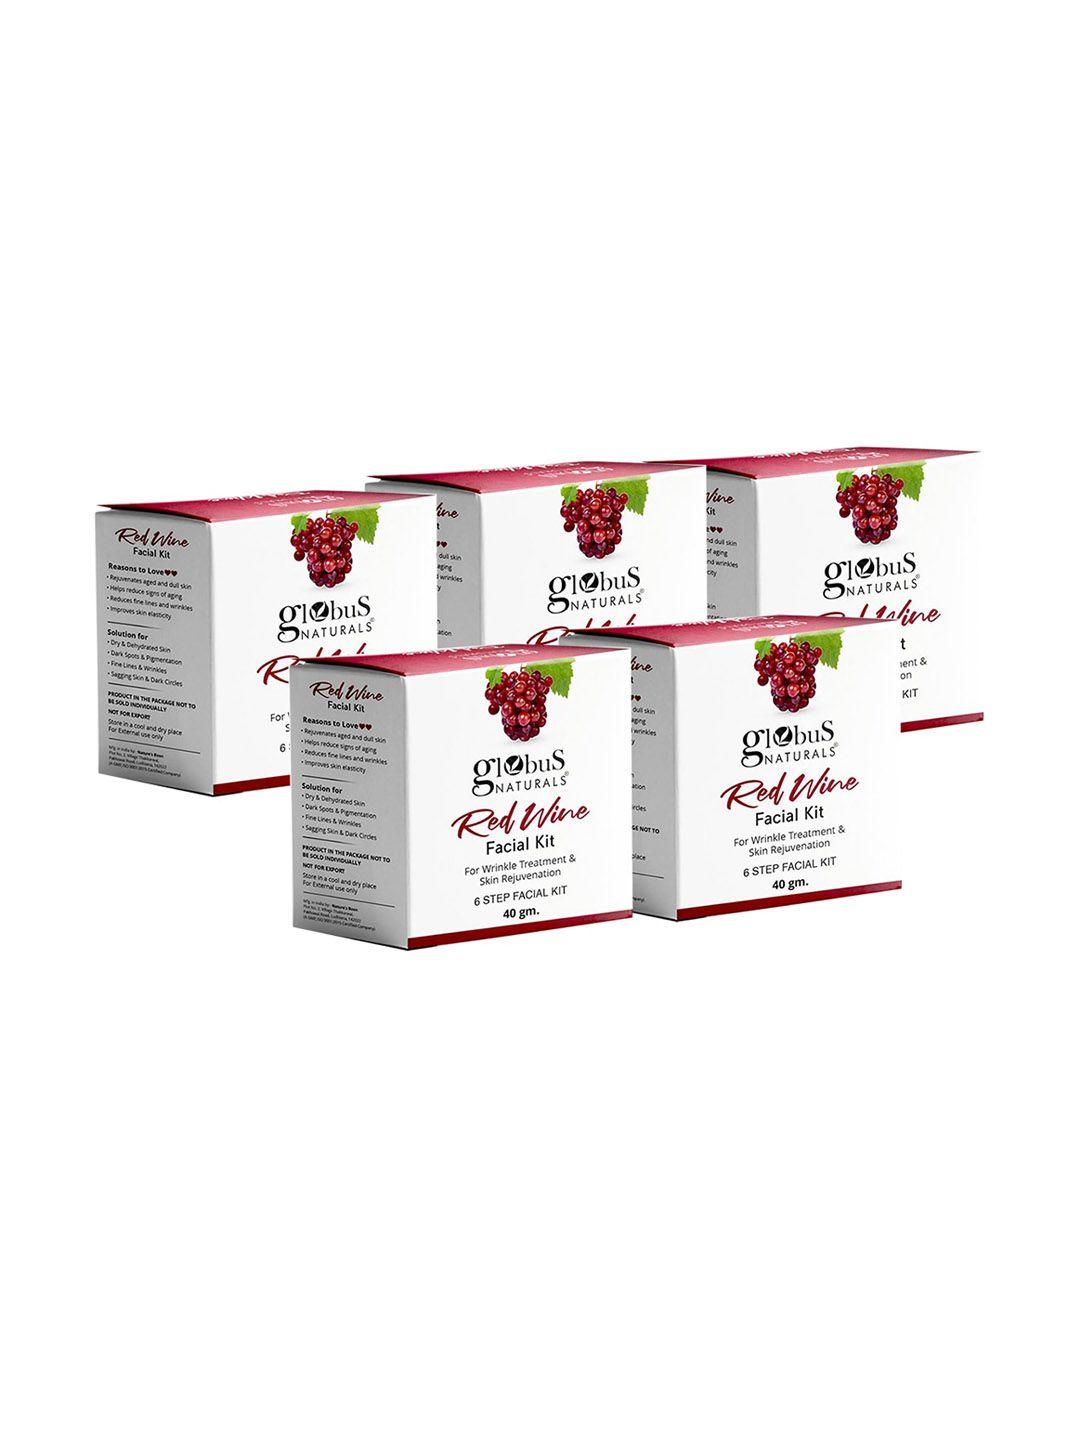 globus naturals 5-pcs red wine facial kit for anti-aging - 40g each